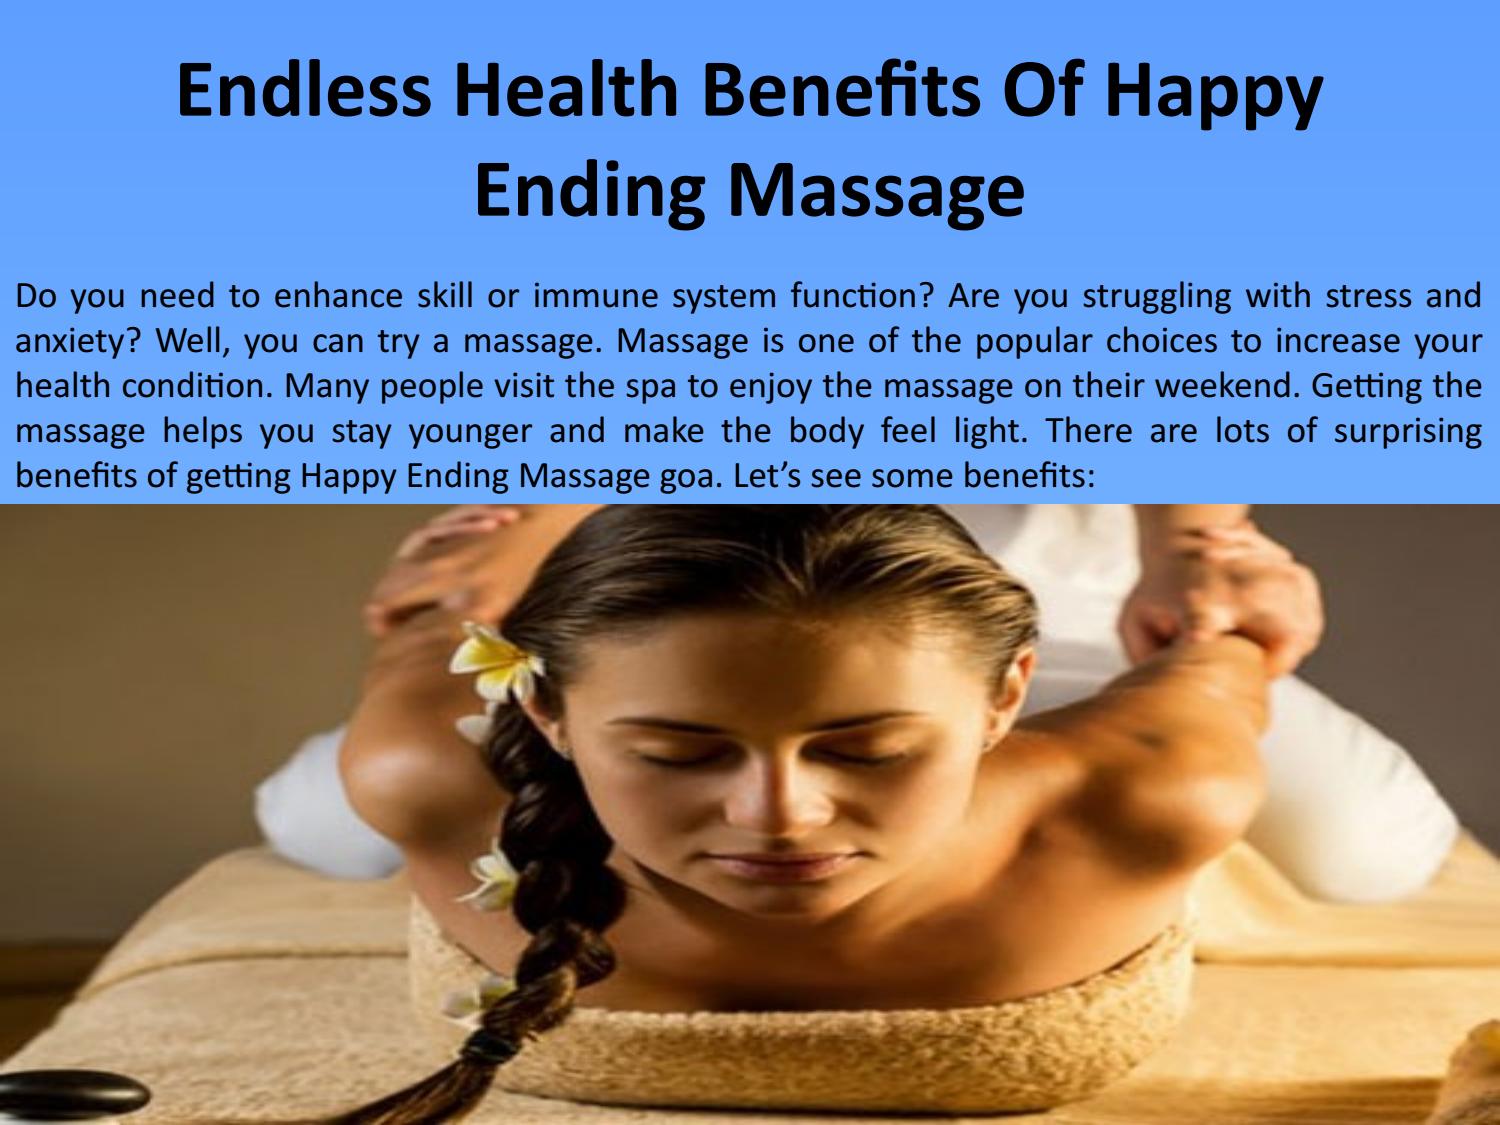 ajit kumar satapathy recommends how to find a happy ending massage pic